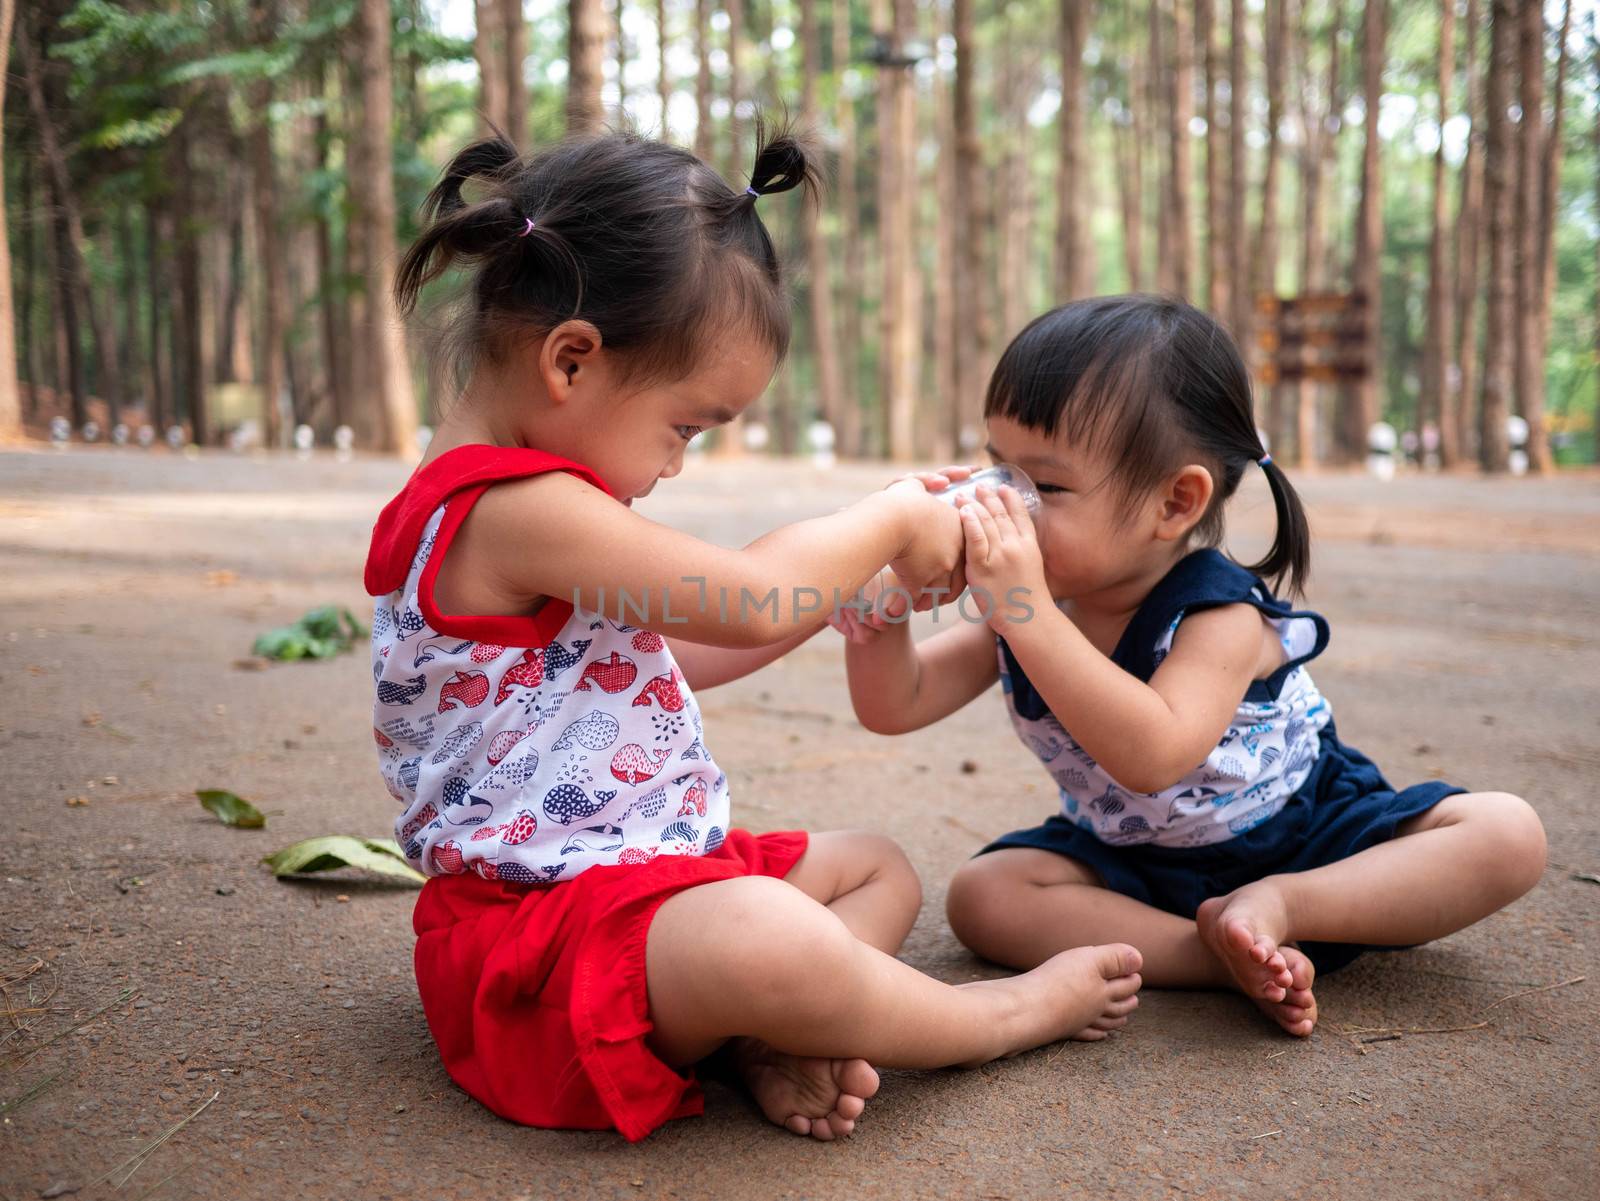 Asian little child sit in the garden and feed some milk to her sister from glass by TEERASAK